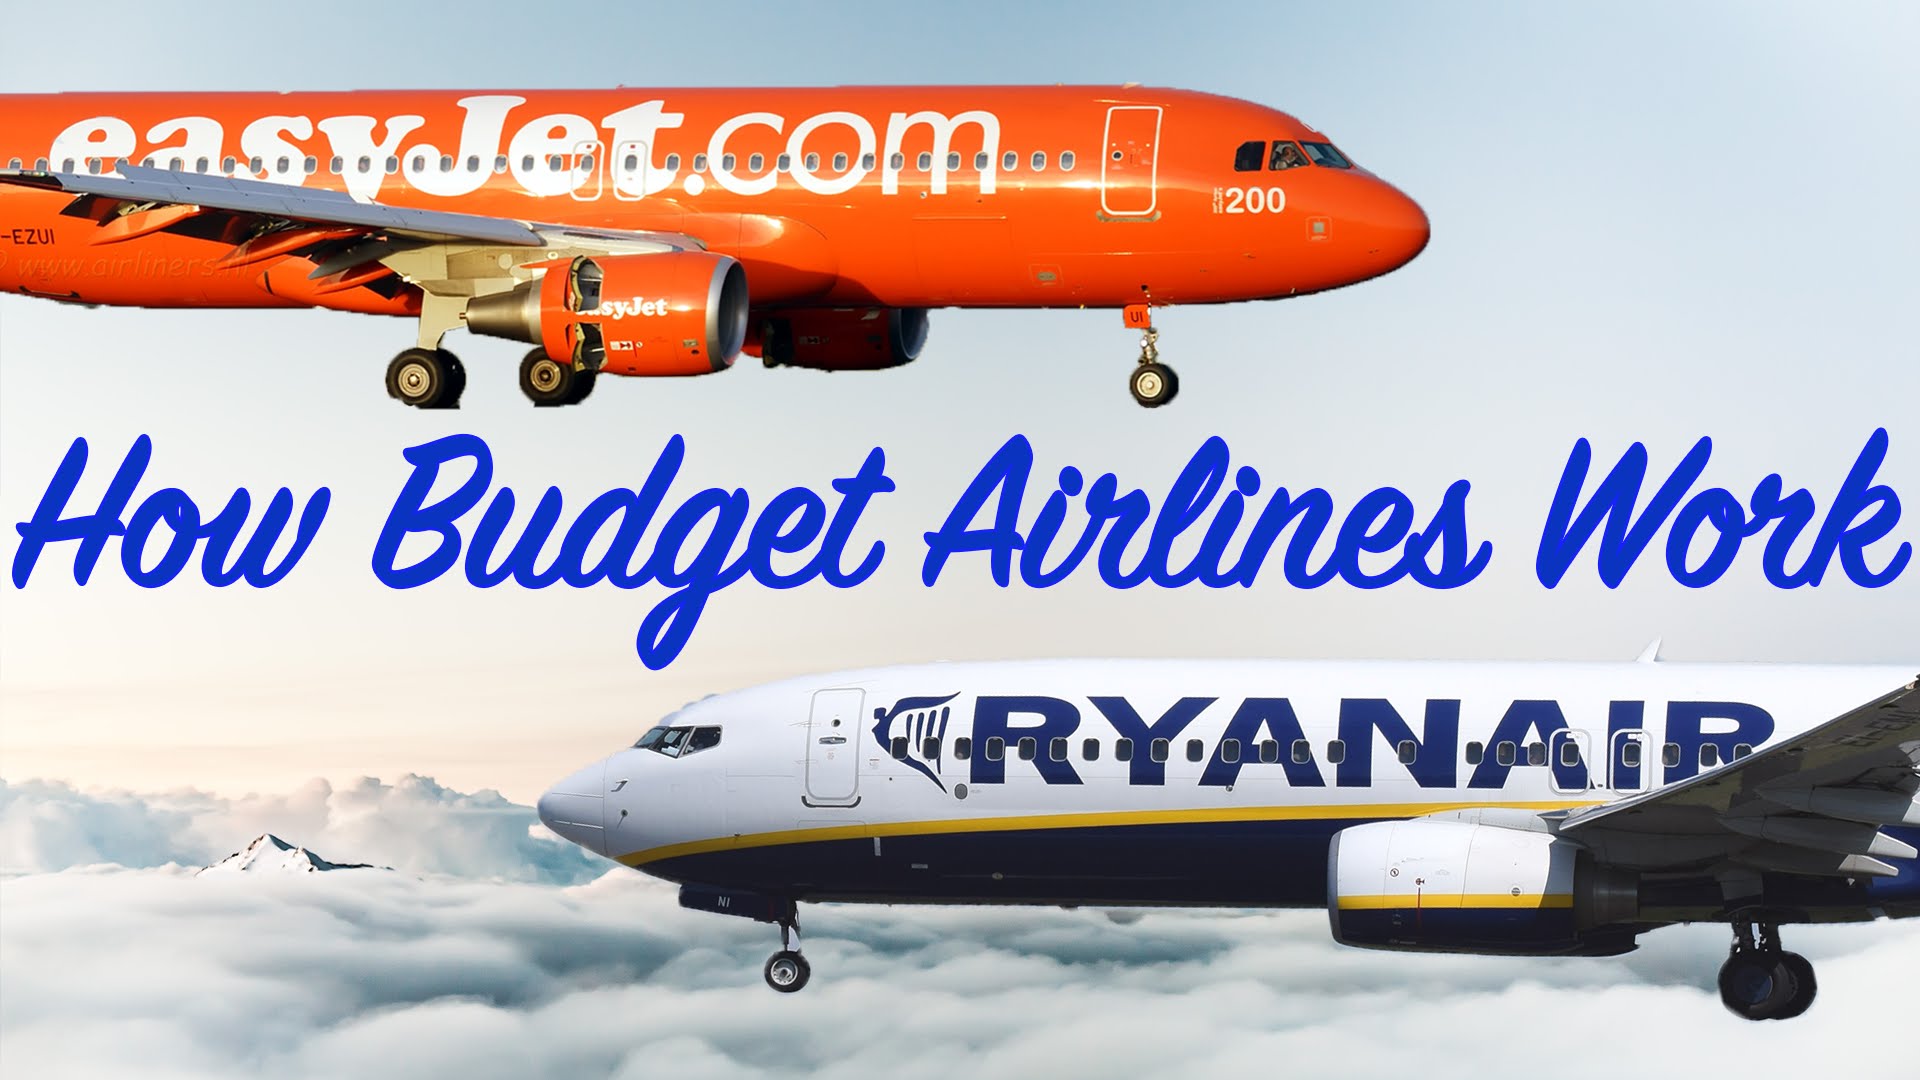 new budget airlines